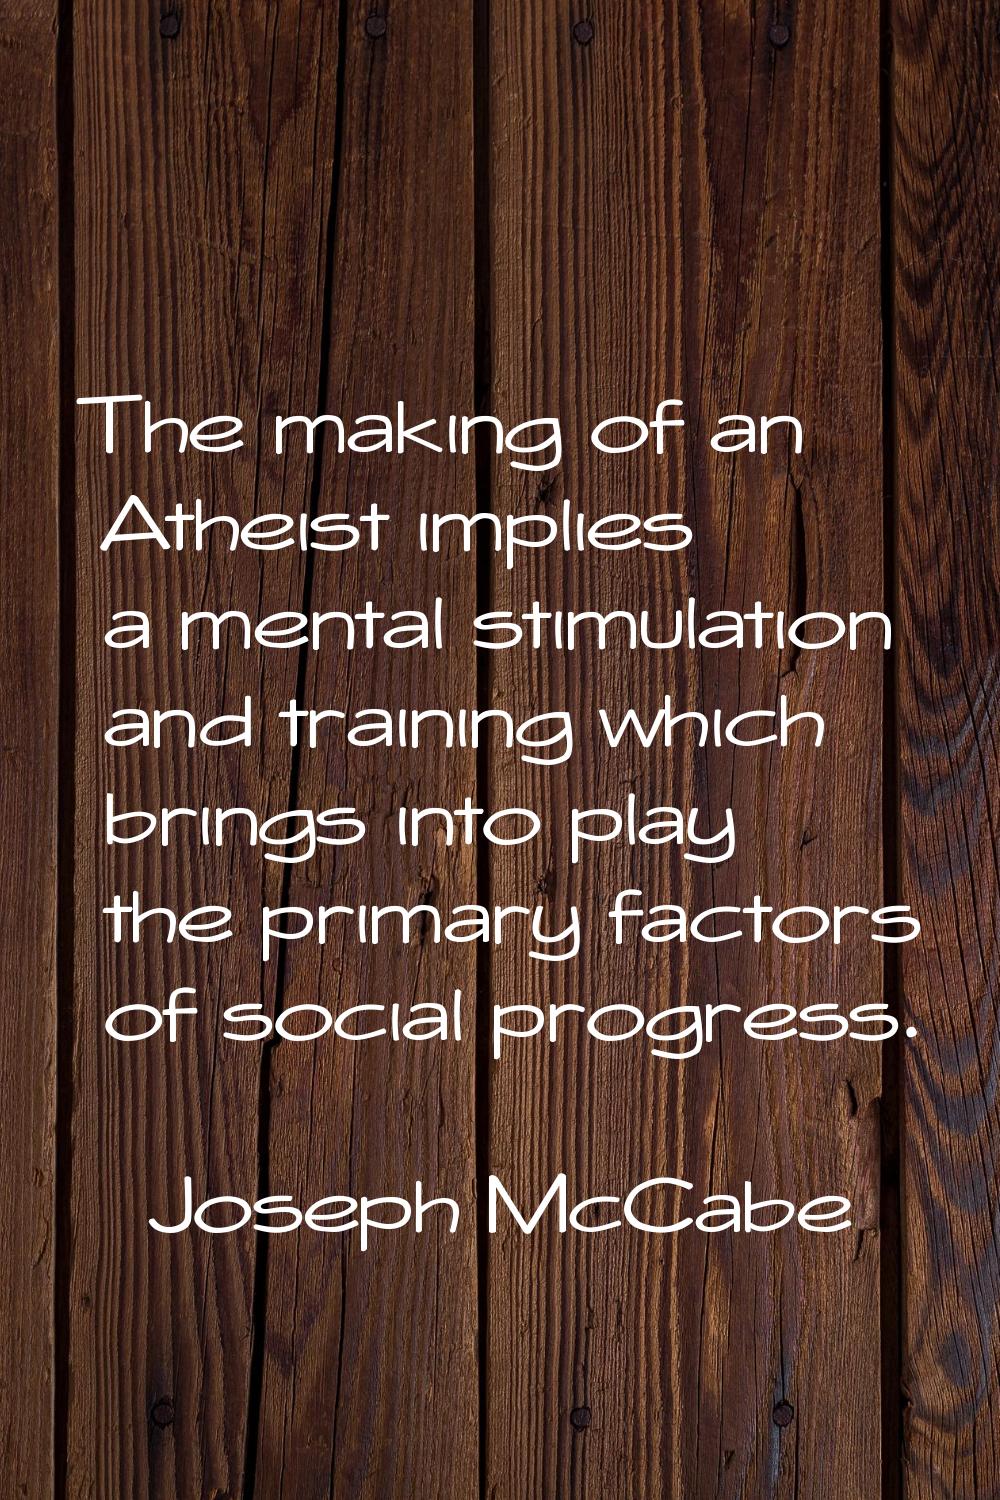 The making of an Atheist implies a mental stimulation and training which brings into play the prima